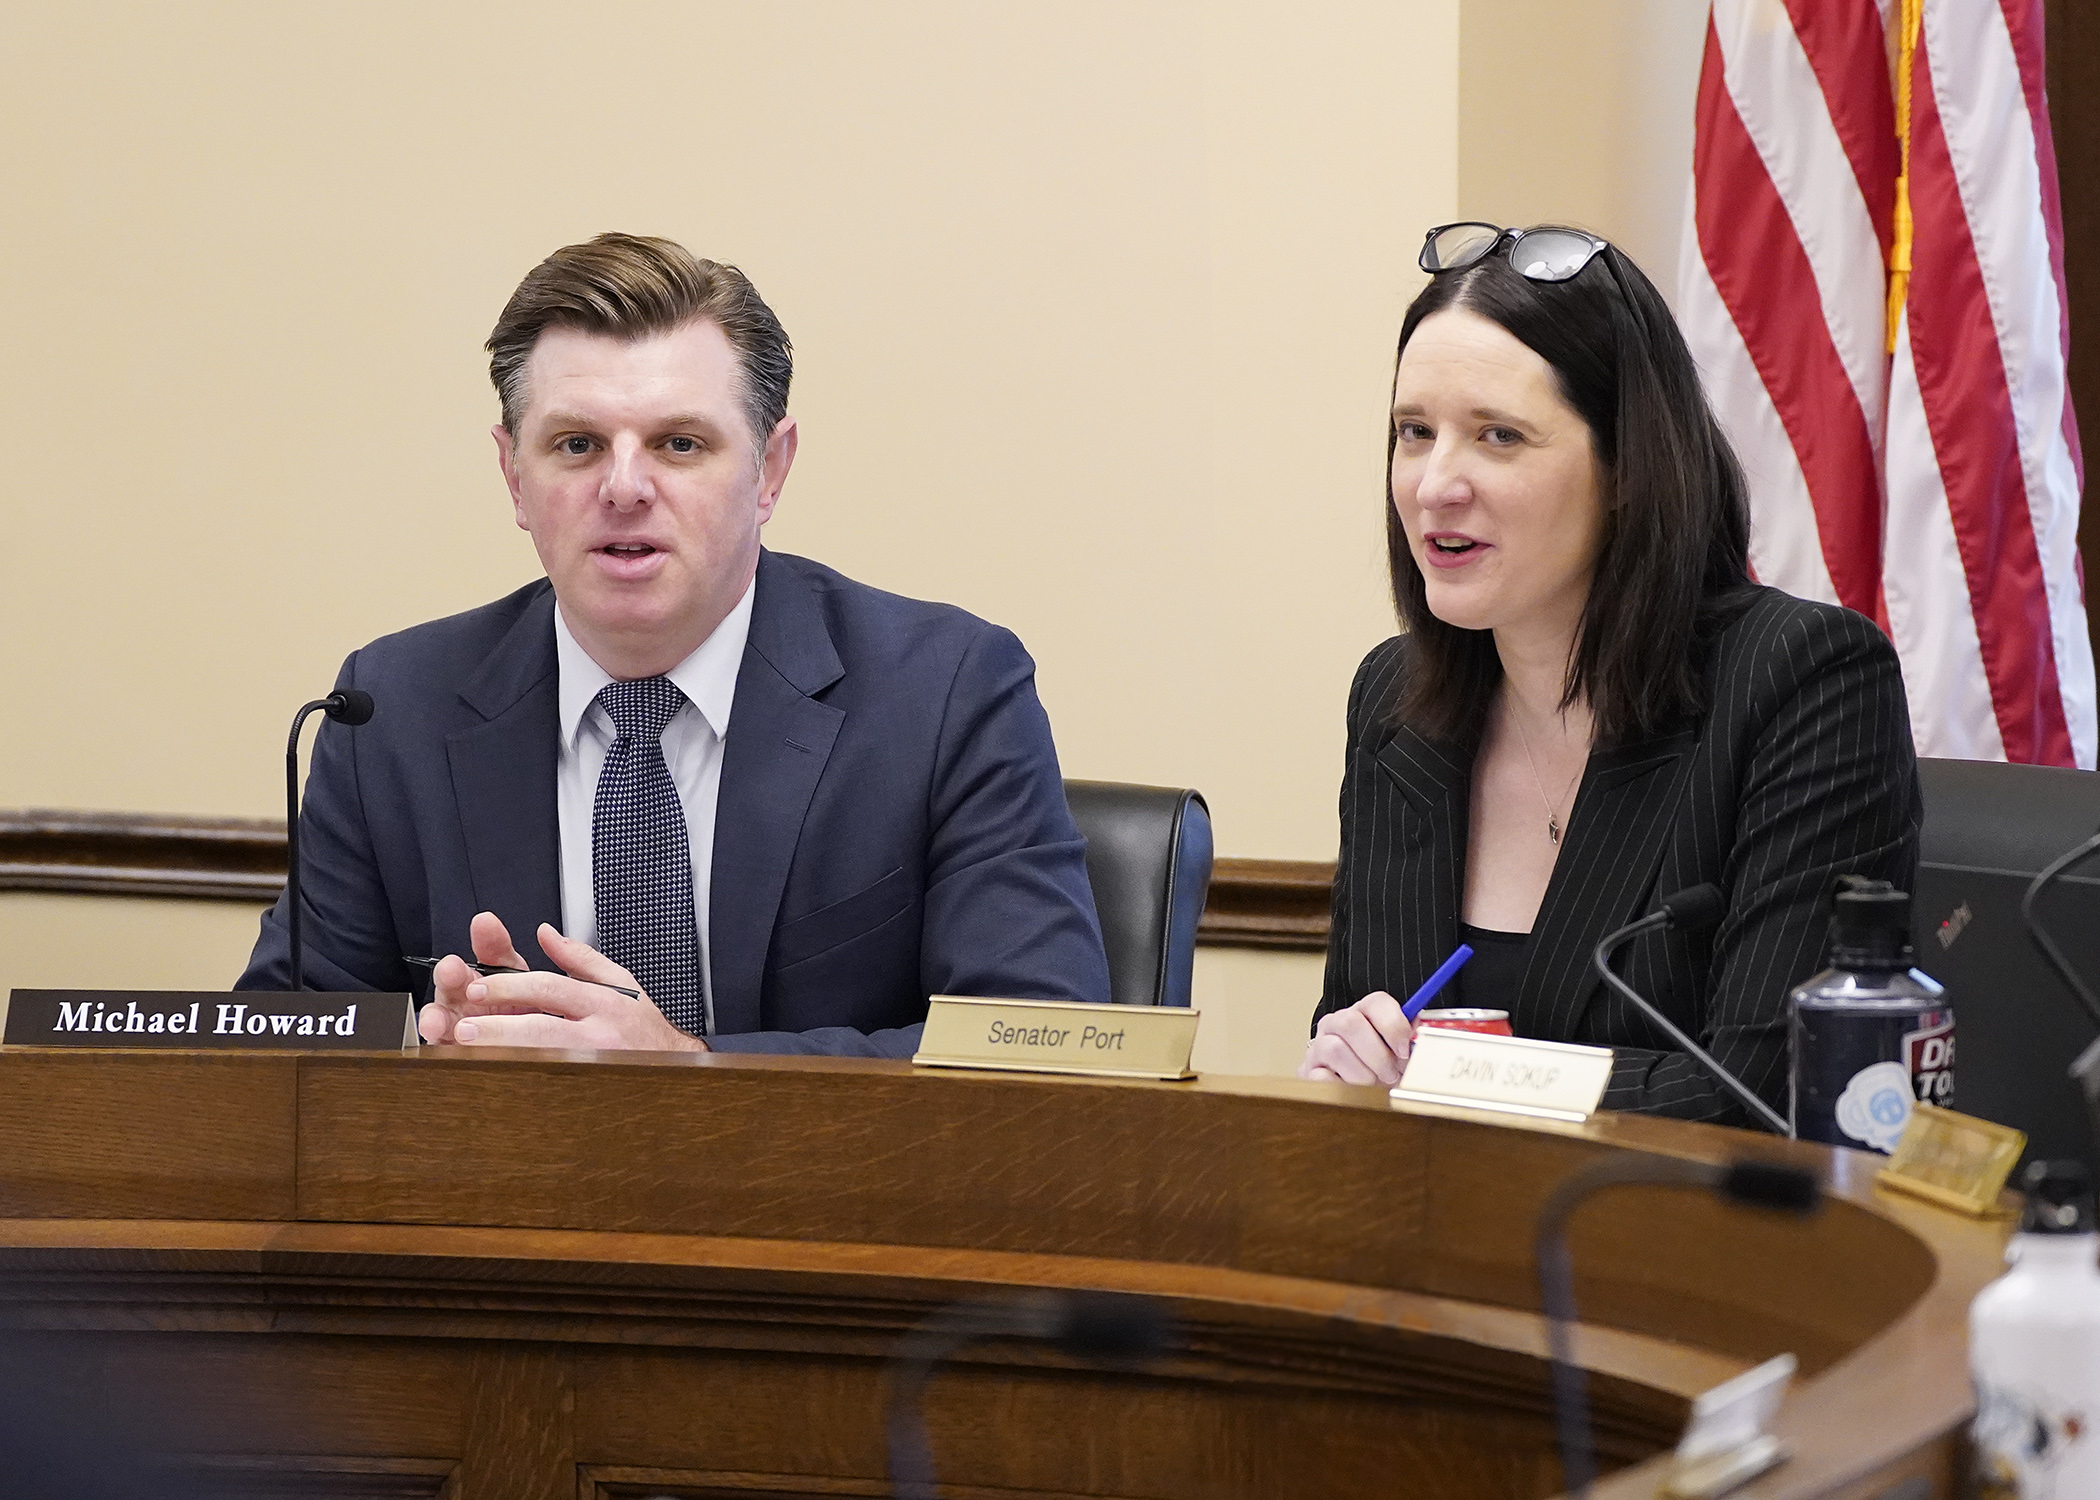 Rep. Michael Howard and Sen. Lindsey Port listen as staff do a walkthrough of the spreadsheet and side-by-side comparison during the first meeting of the omnibus housing bill conference committee. (Photo by Andrew VonBank)